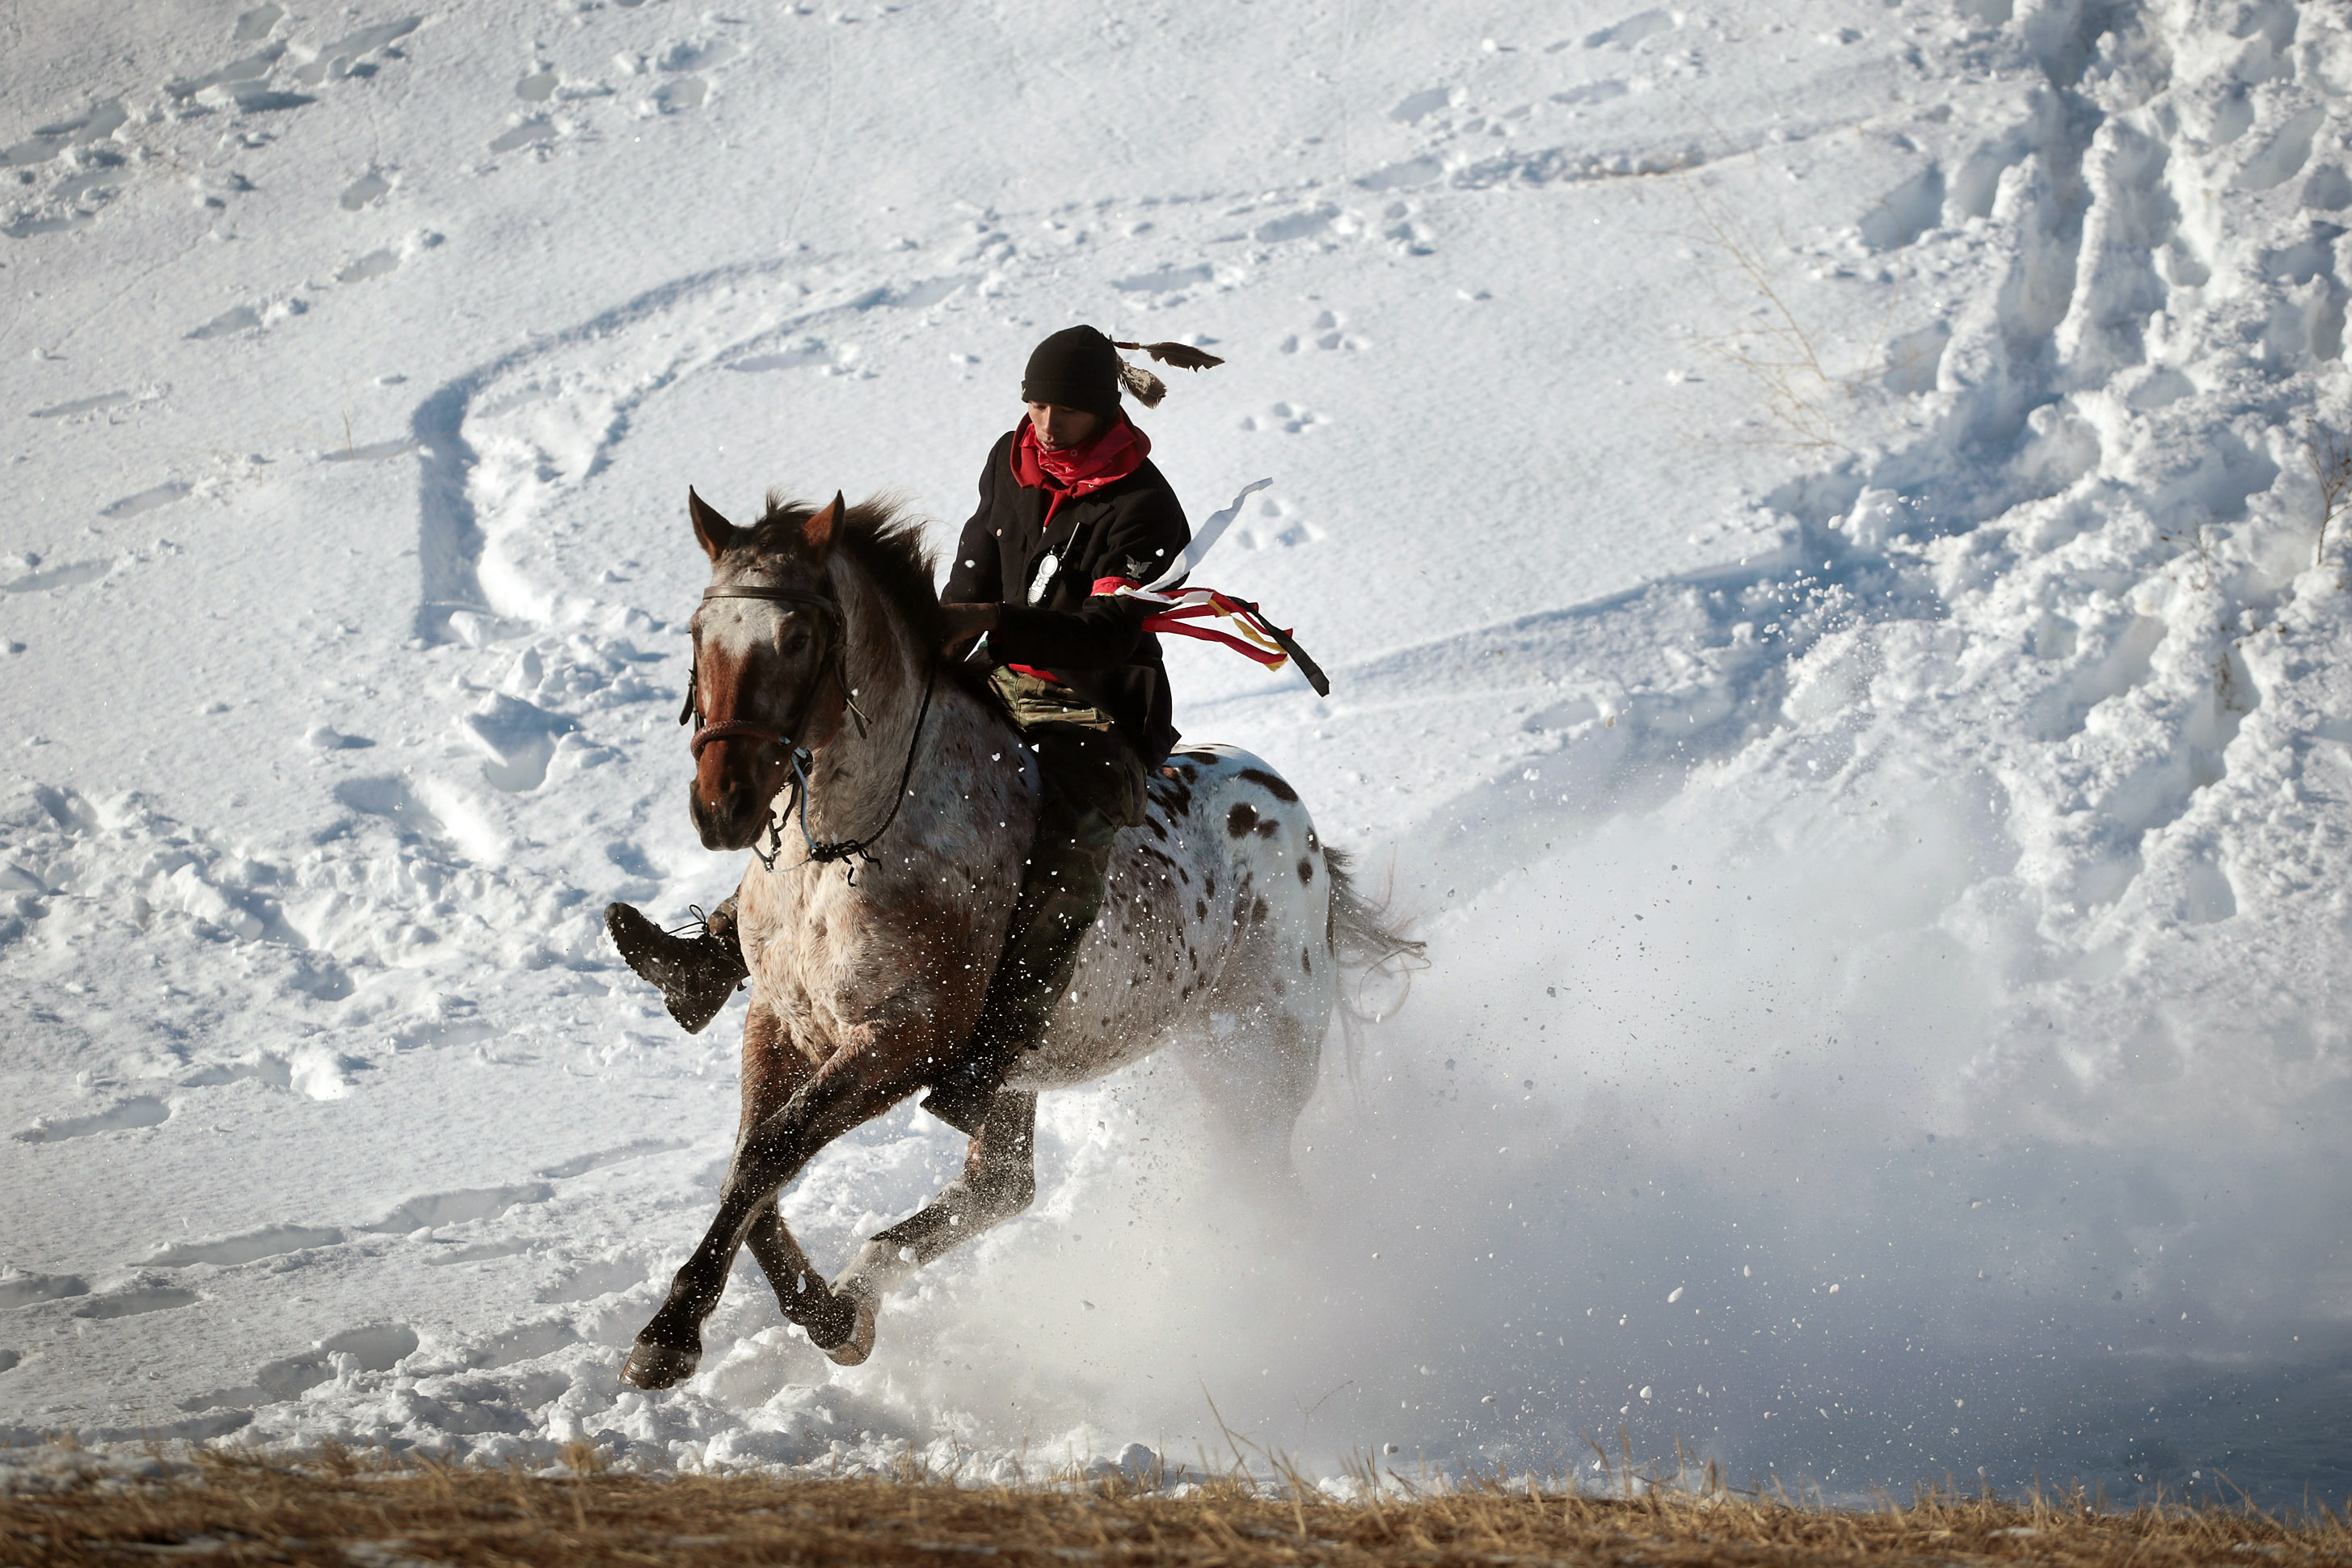 Native American activist rides down a ridge which overlooks Oceti Sakowin Camp on the edge of the Standing Rock Sioux Reservation on December 4, 2016 outside Cannon Ball, North Dakota.